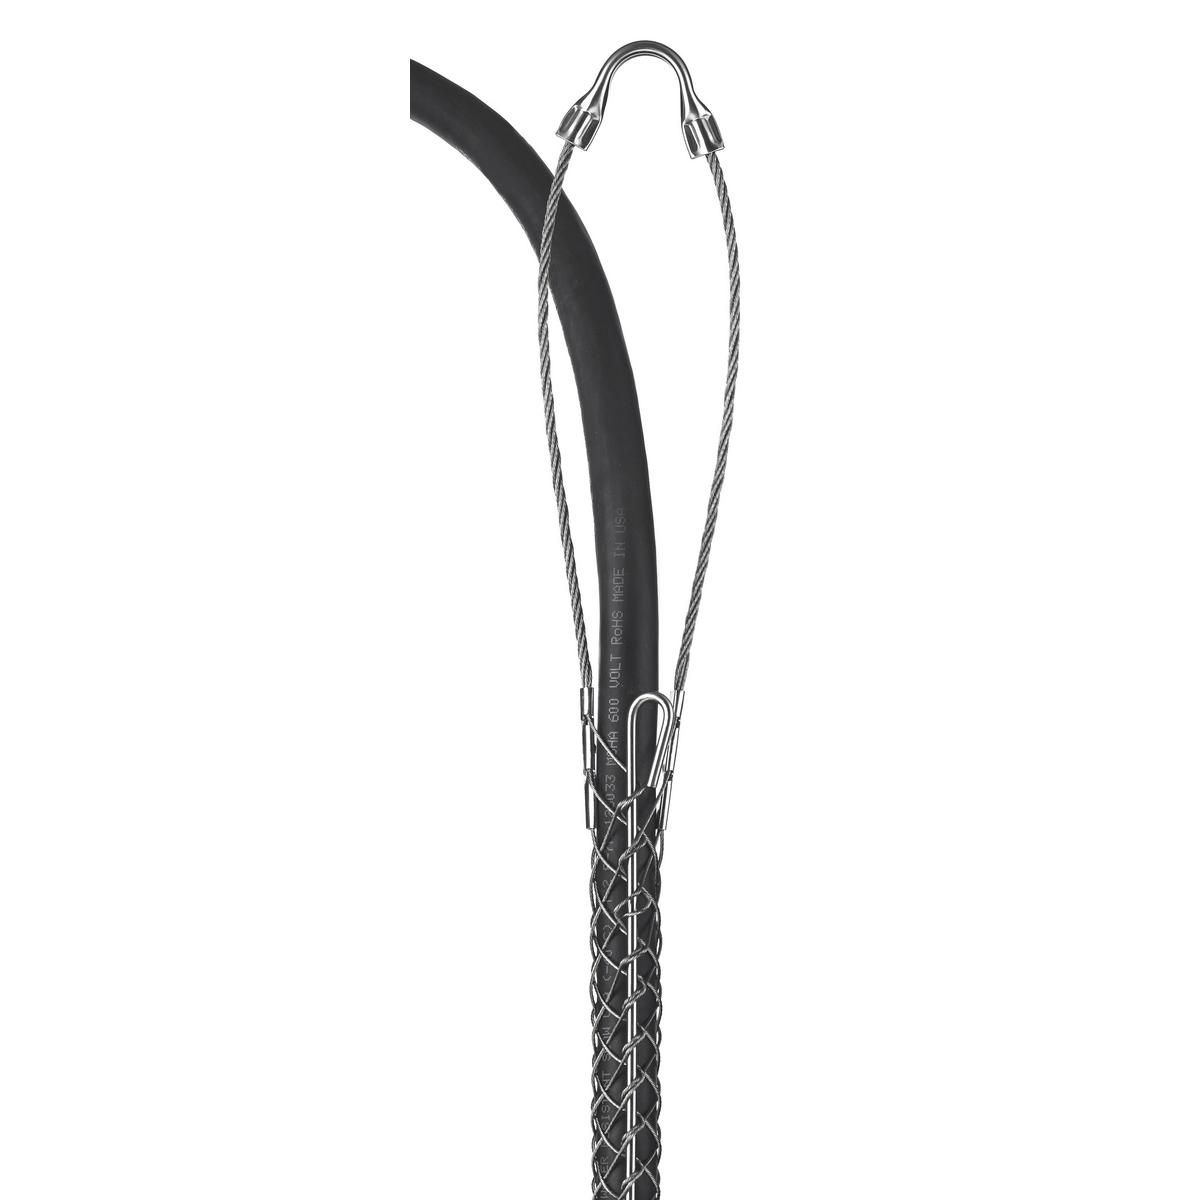 Hubbell 02403021 Support Grips, Single Eye, Single Weave, Split Mesh, Rod Closing, Stainless Steel, 2.00-2.49"  ; Single eye ; Strand equalizers position wires for equal loading throughout grip length ; Eye assemblies provide eye reinforcement at support hardware ; Split 